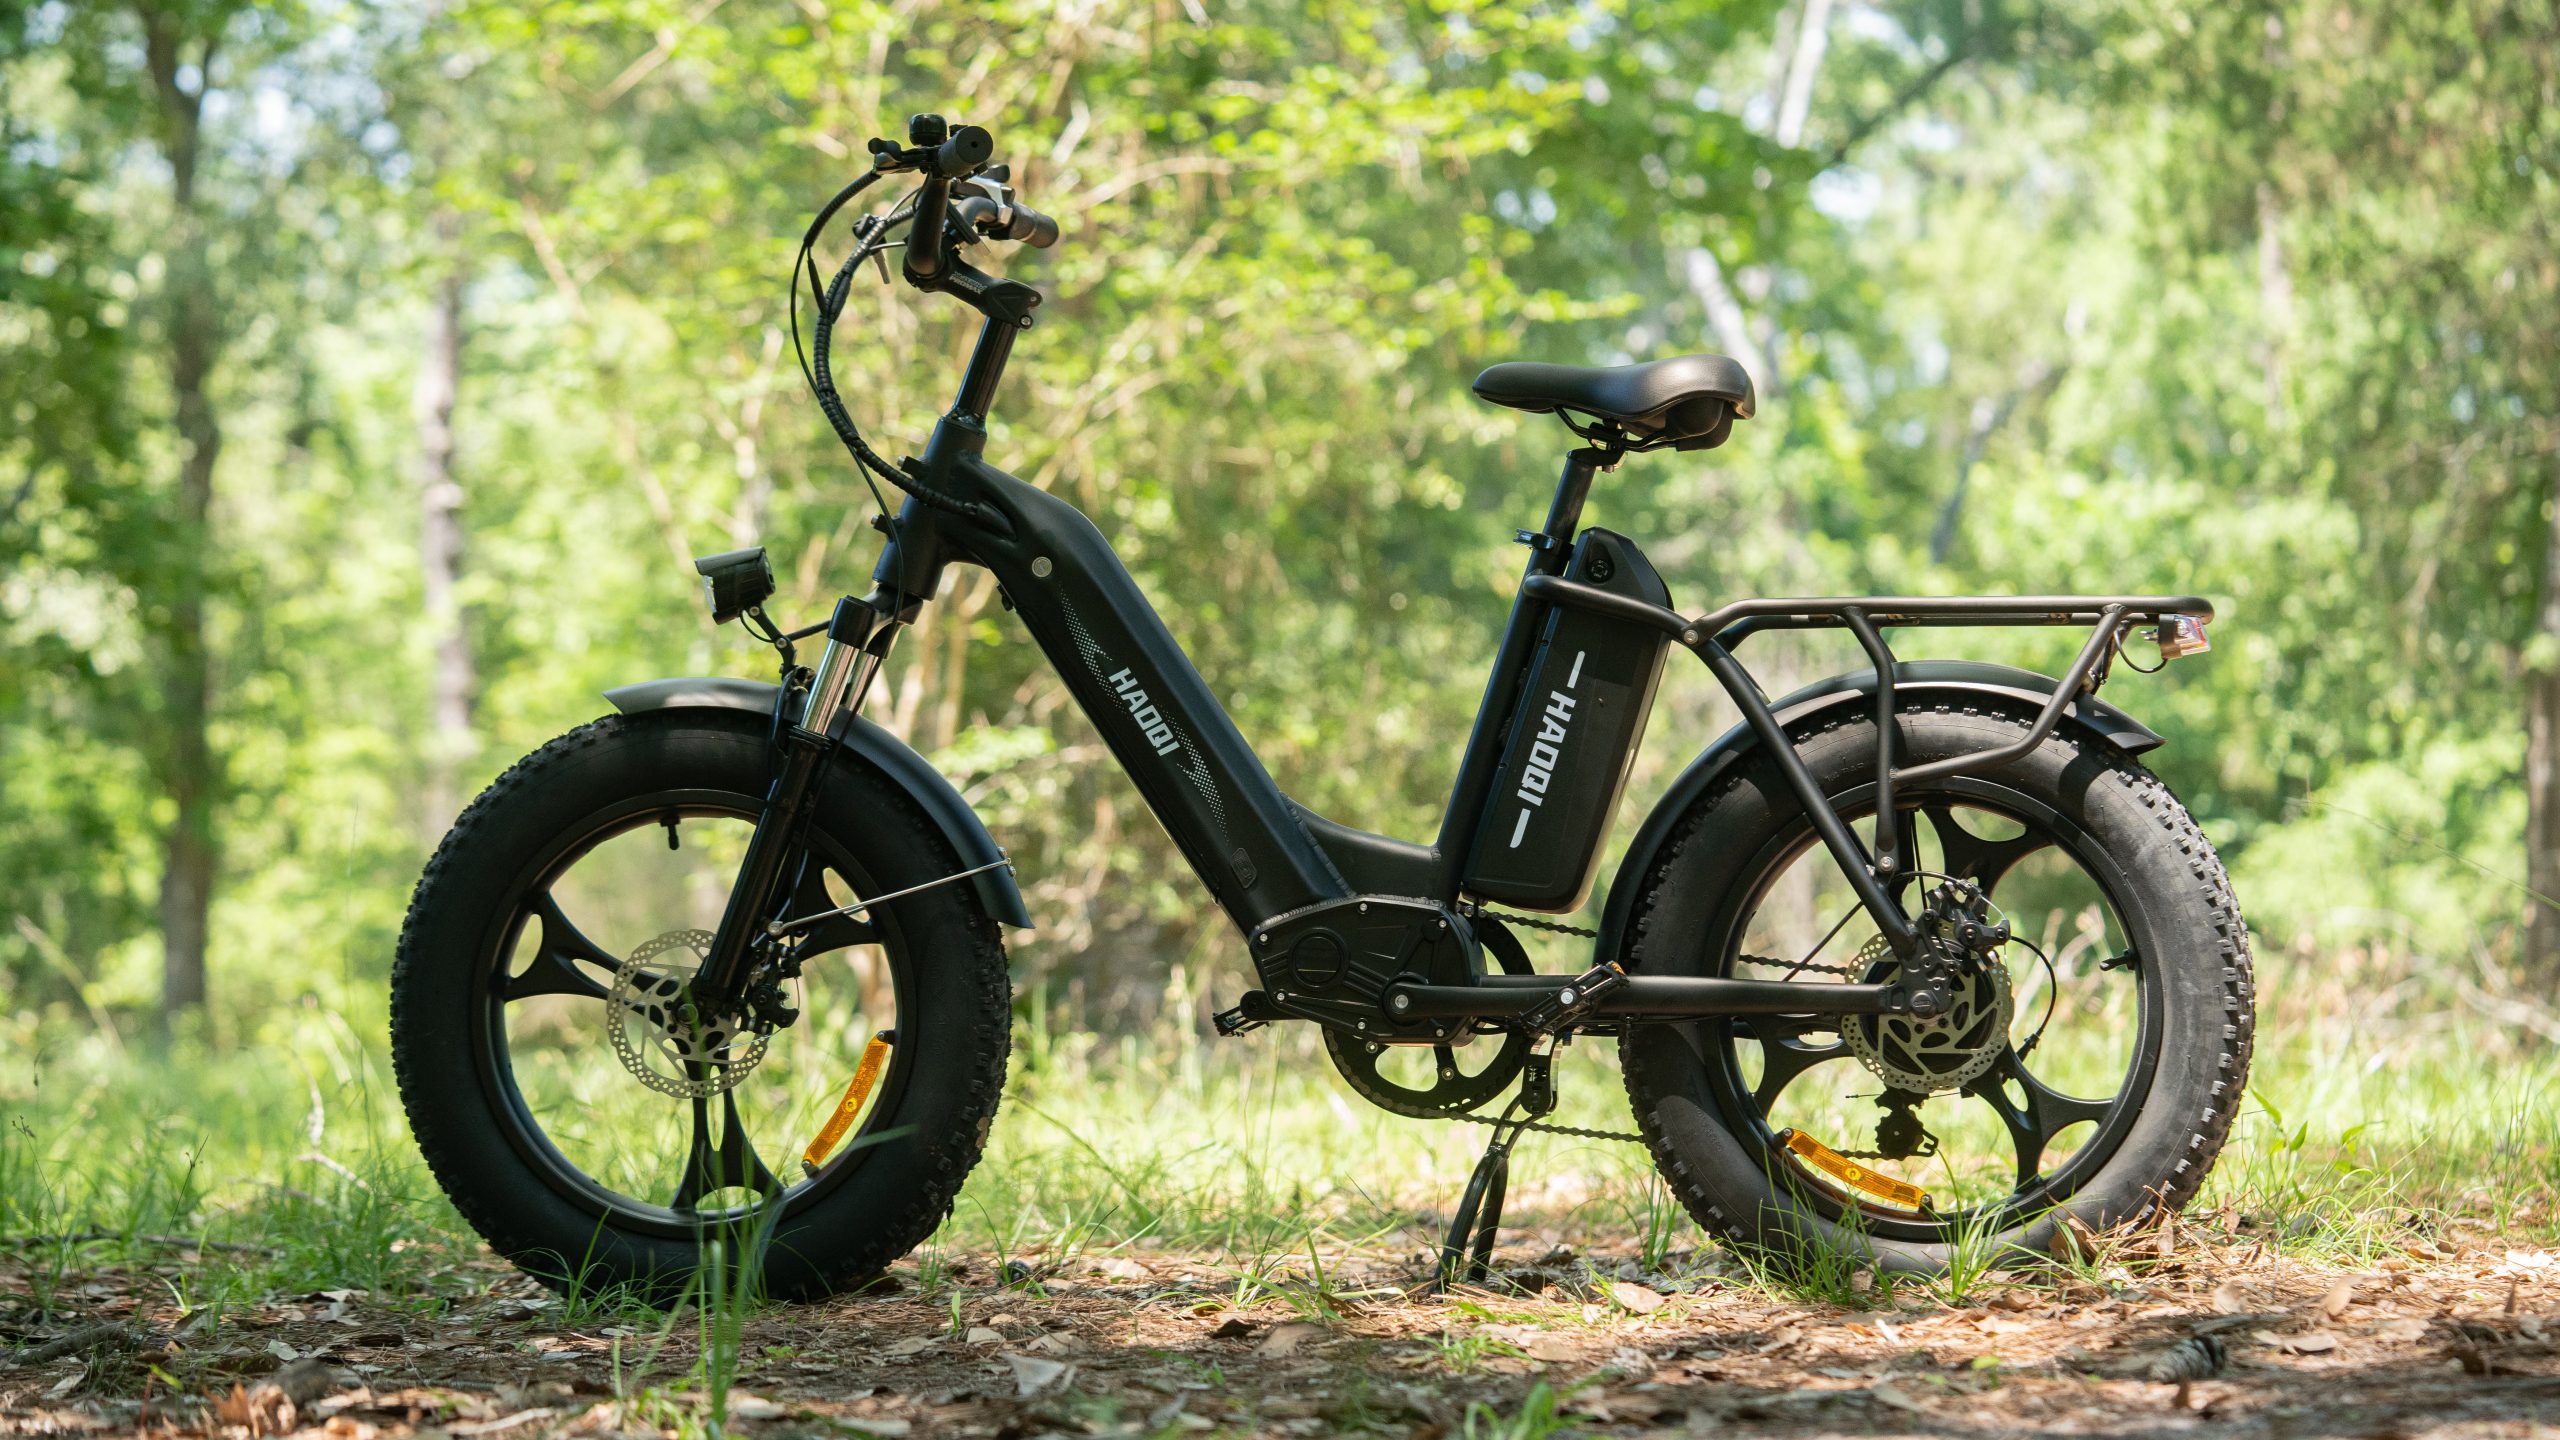 HAOQI Antelope 500W Cargo Electric Bike Tested Review